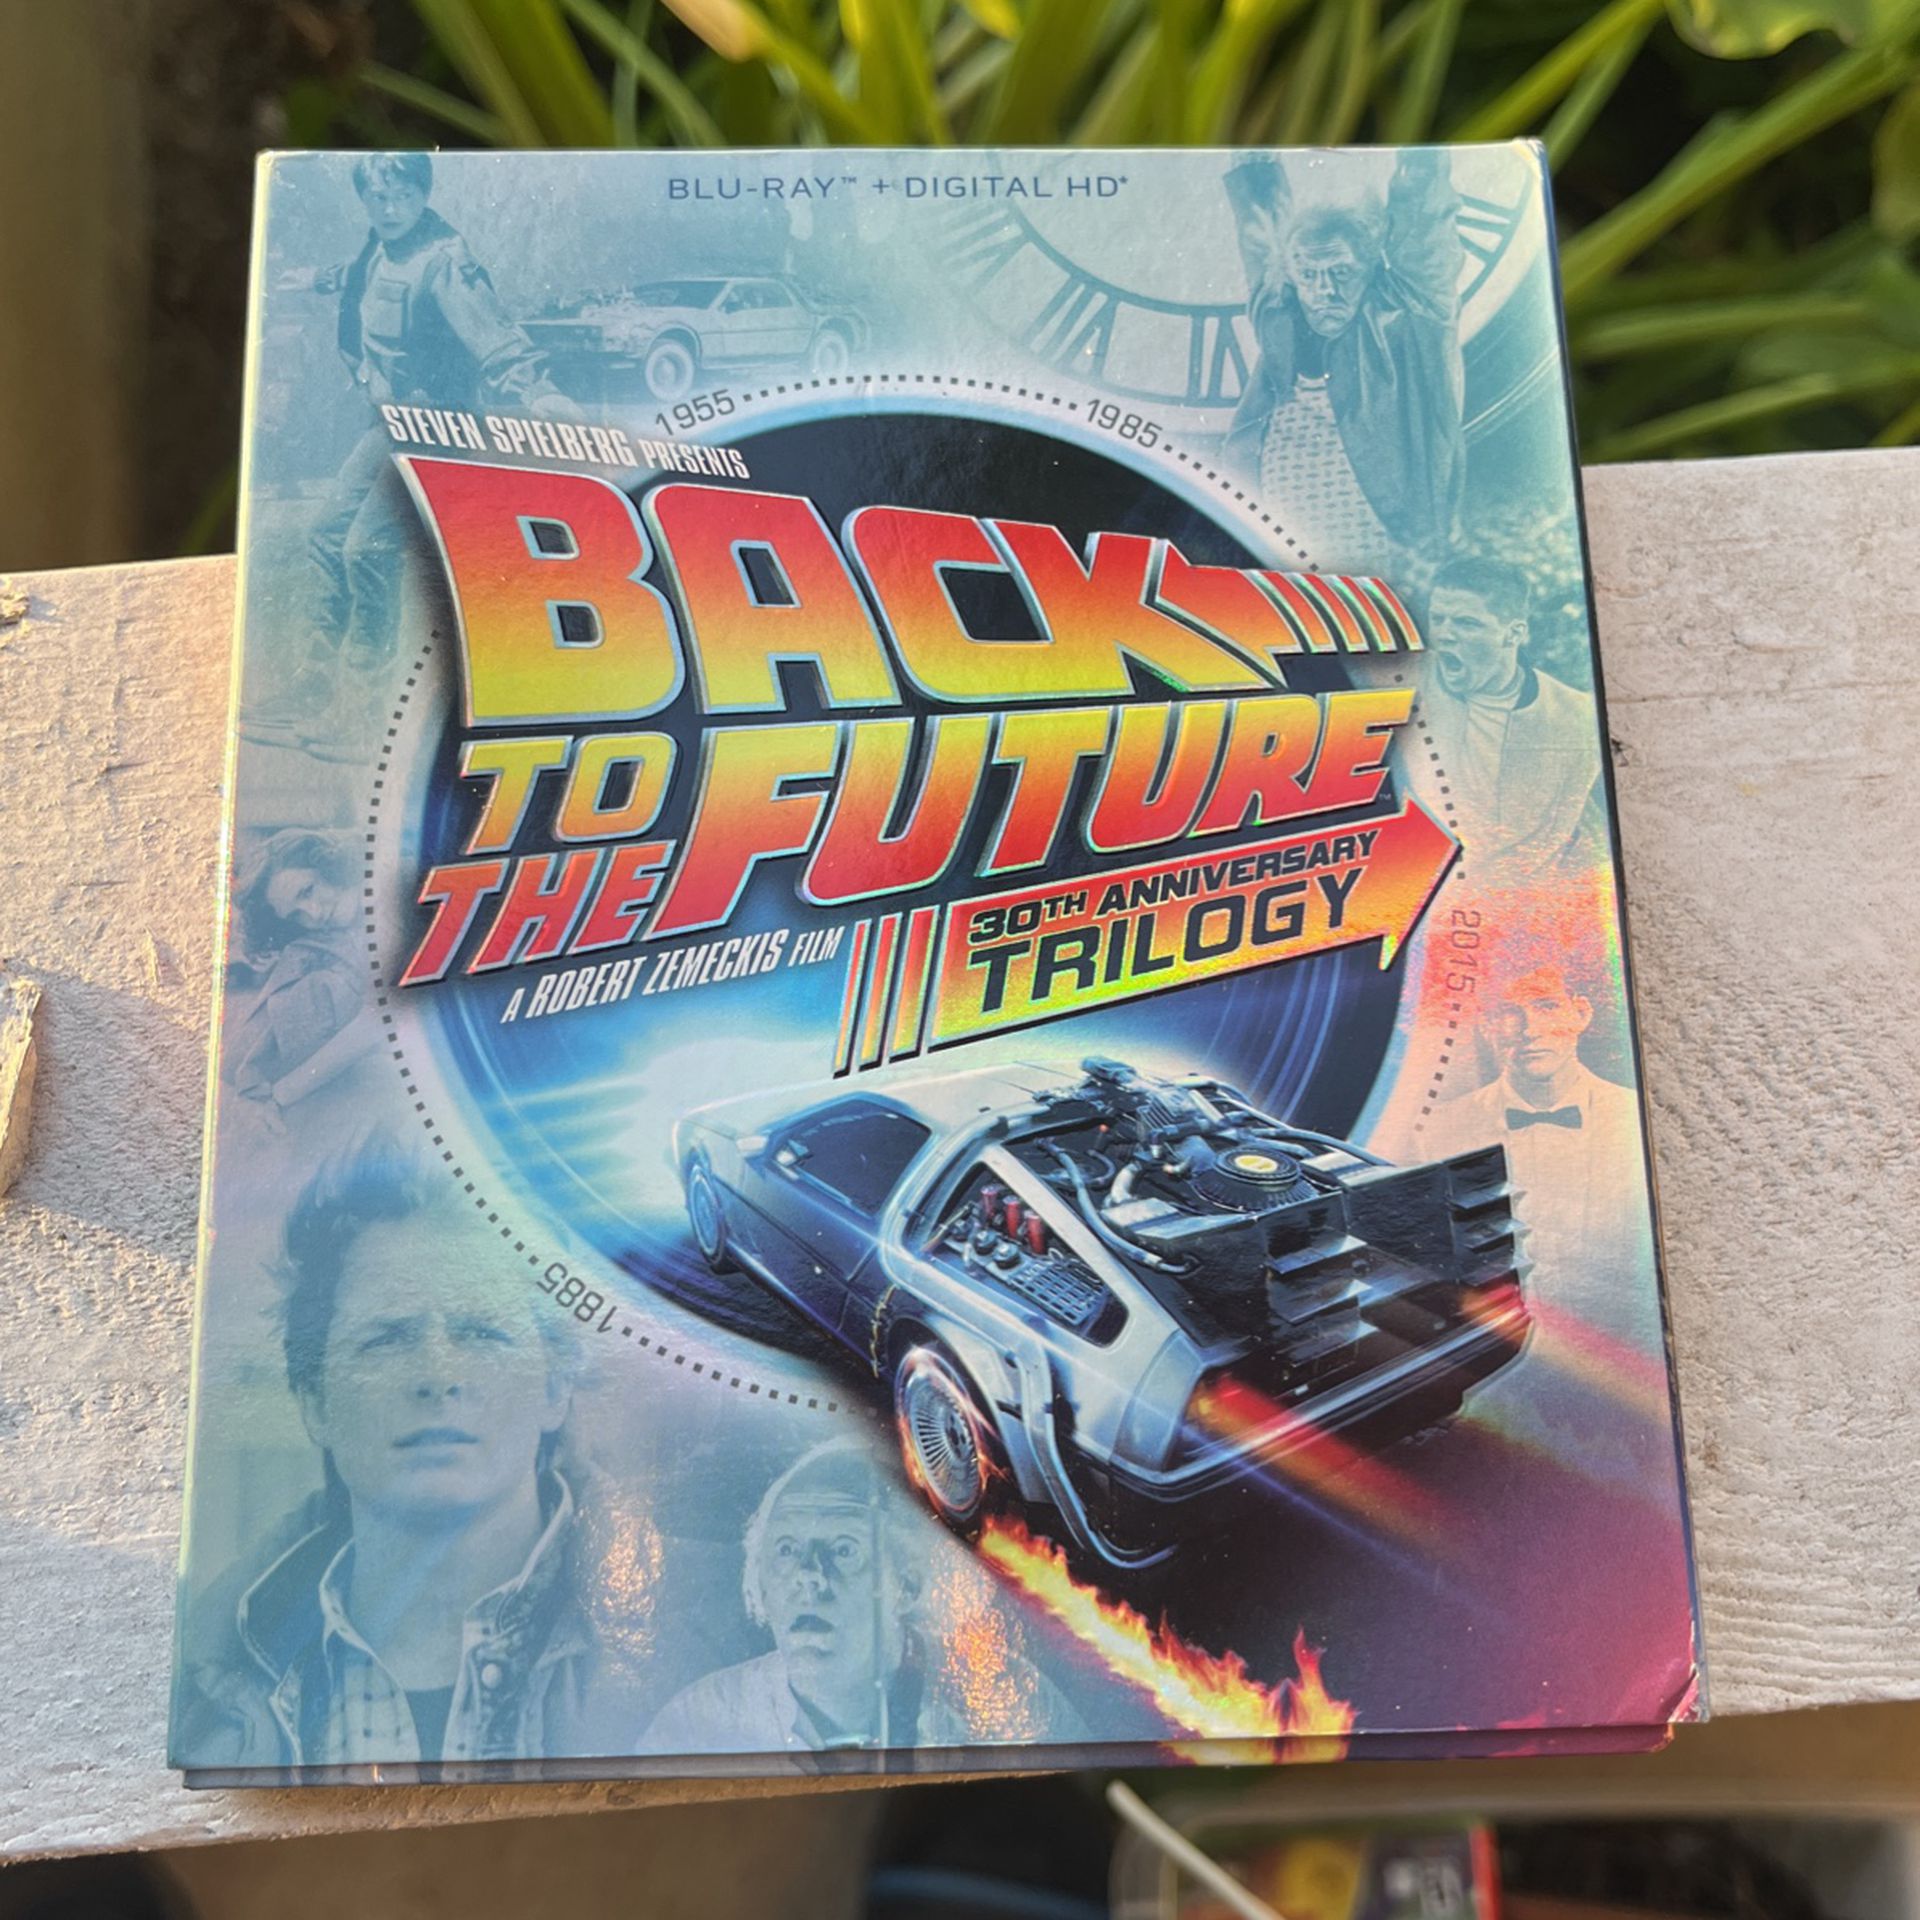 Back To The Future Trilogy Blu-ray 